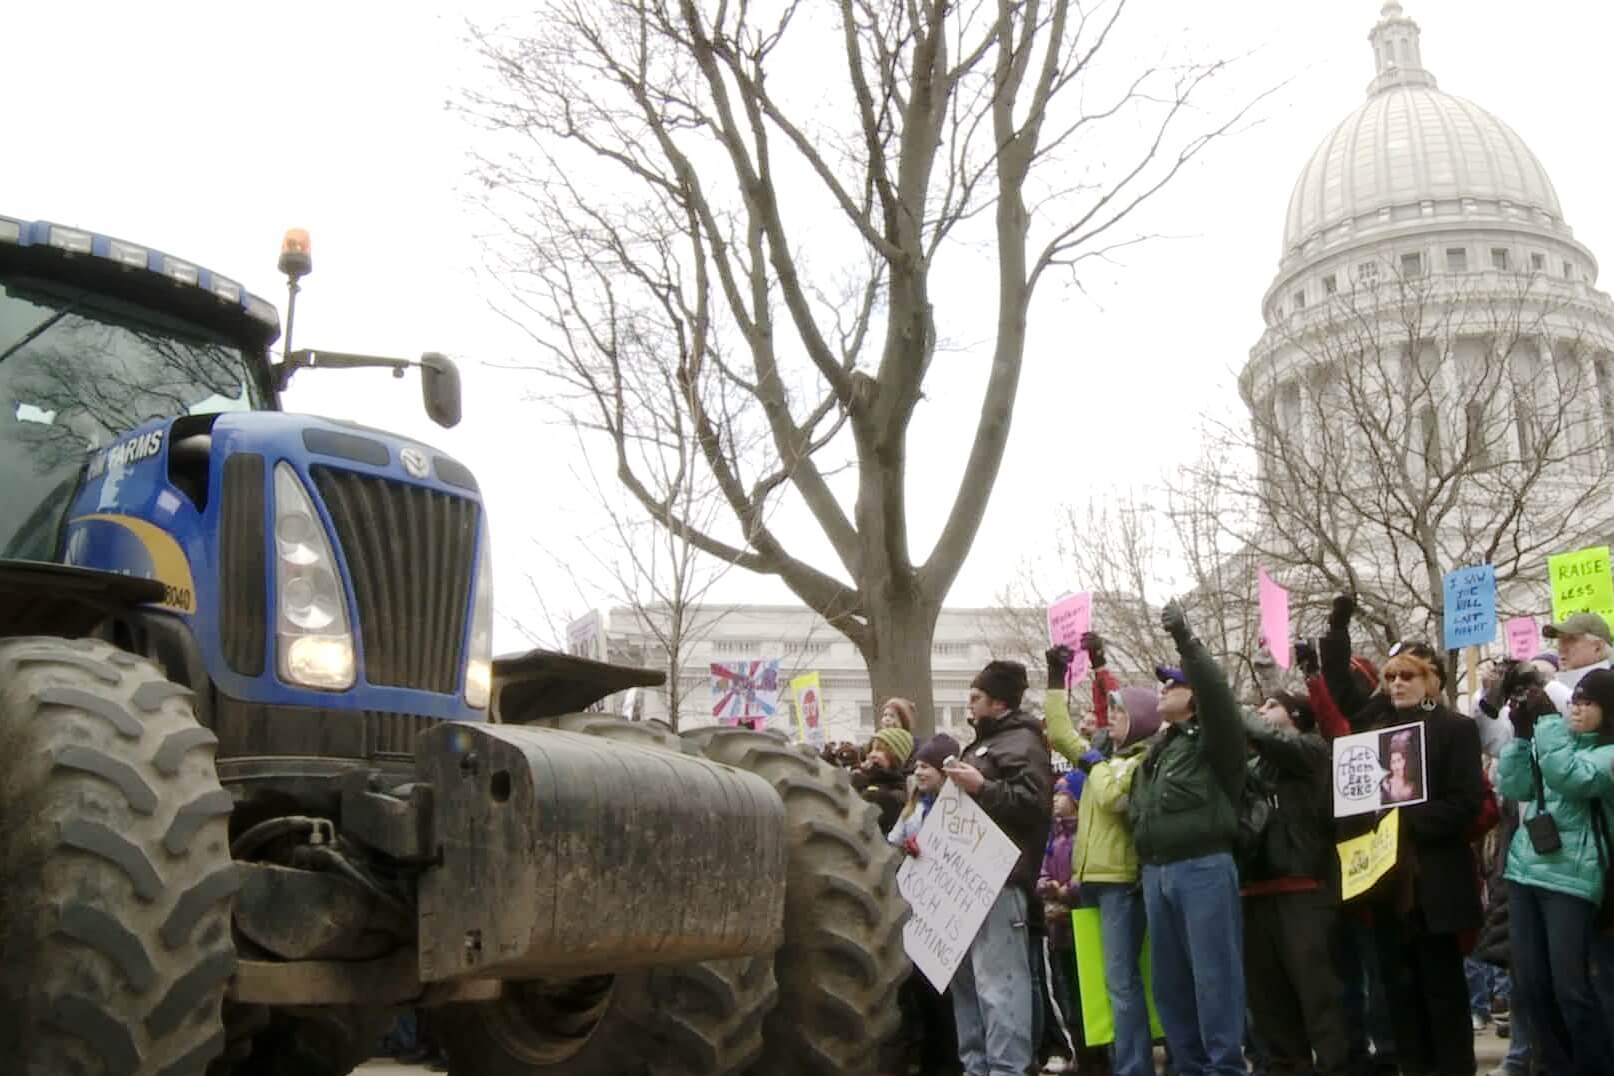 People in a demonstration in DC. They are standing in front of a tractor.